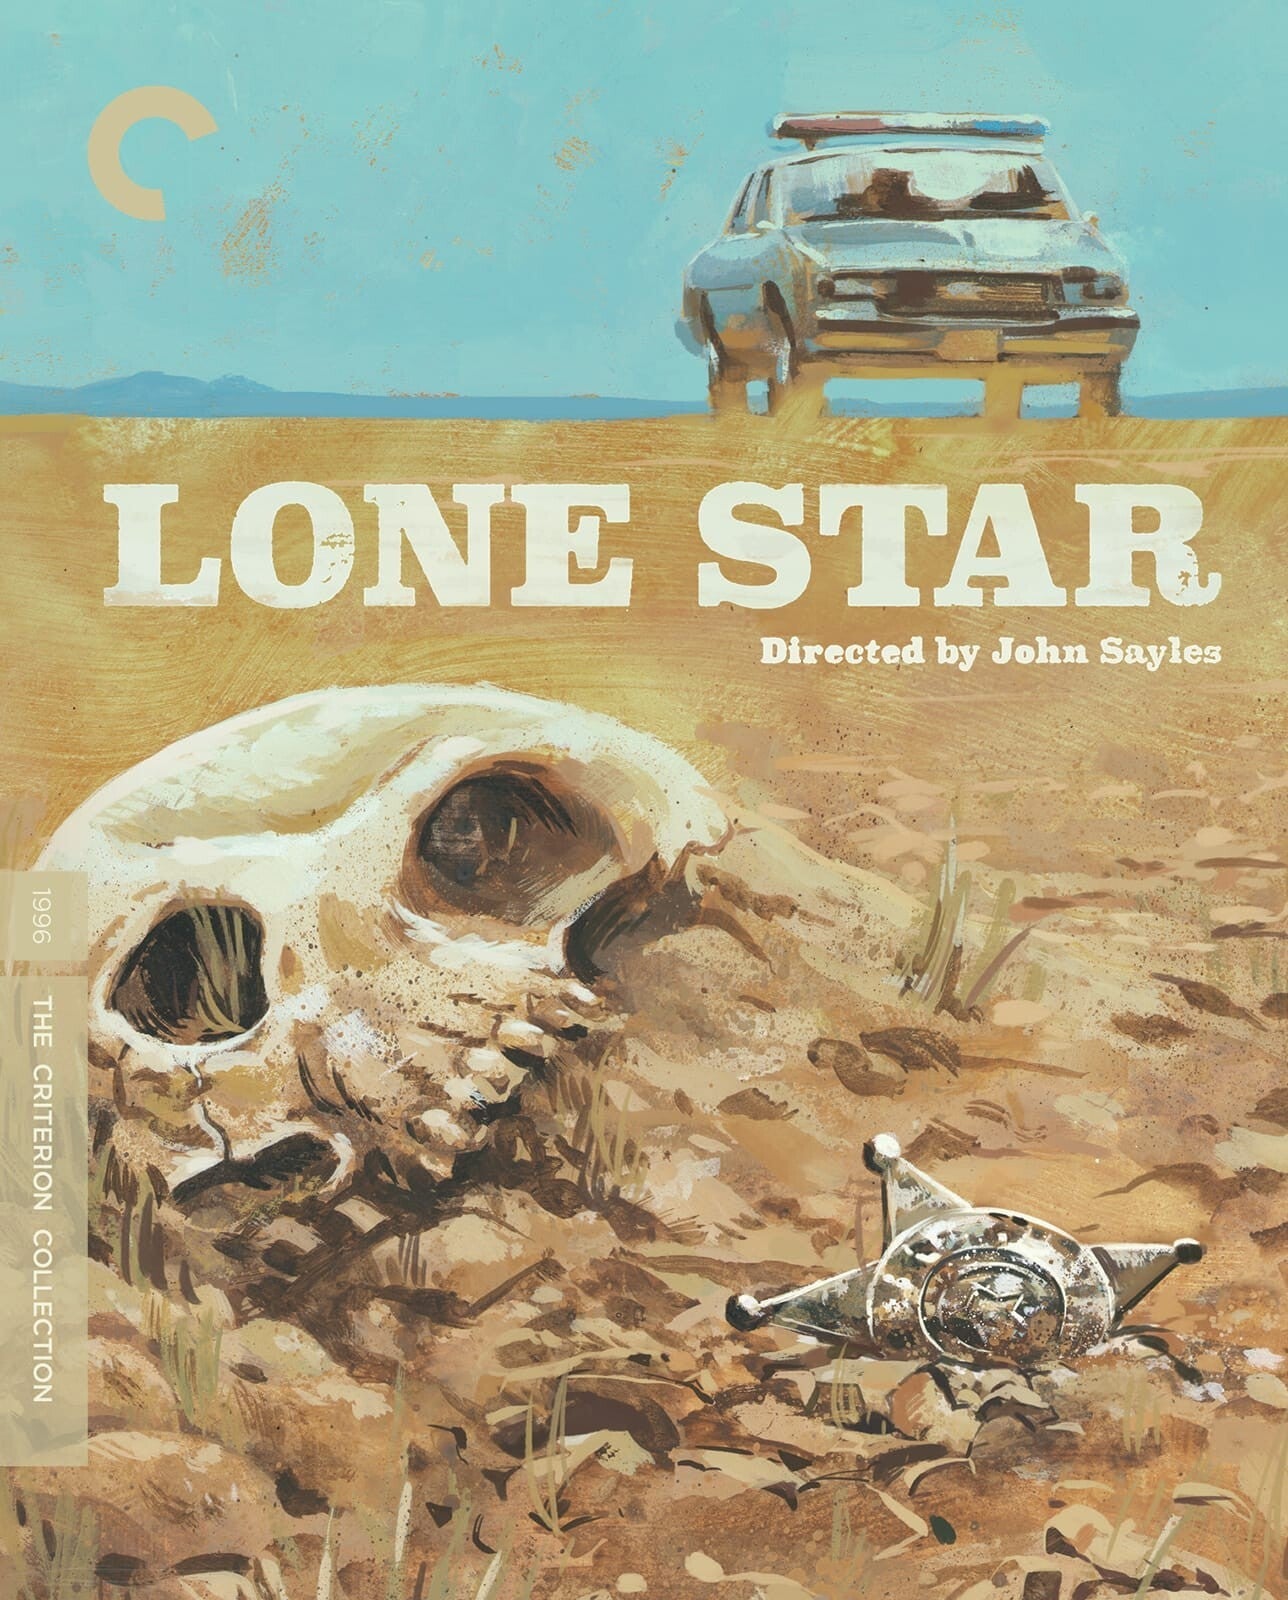 Lone Star 4K: Criterion Collection (1996)